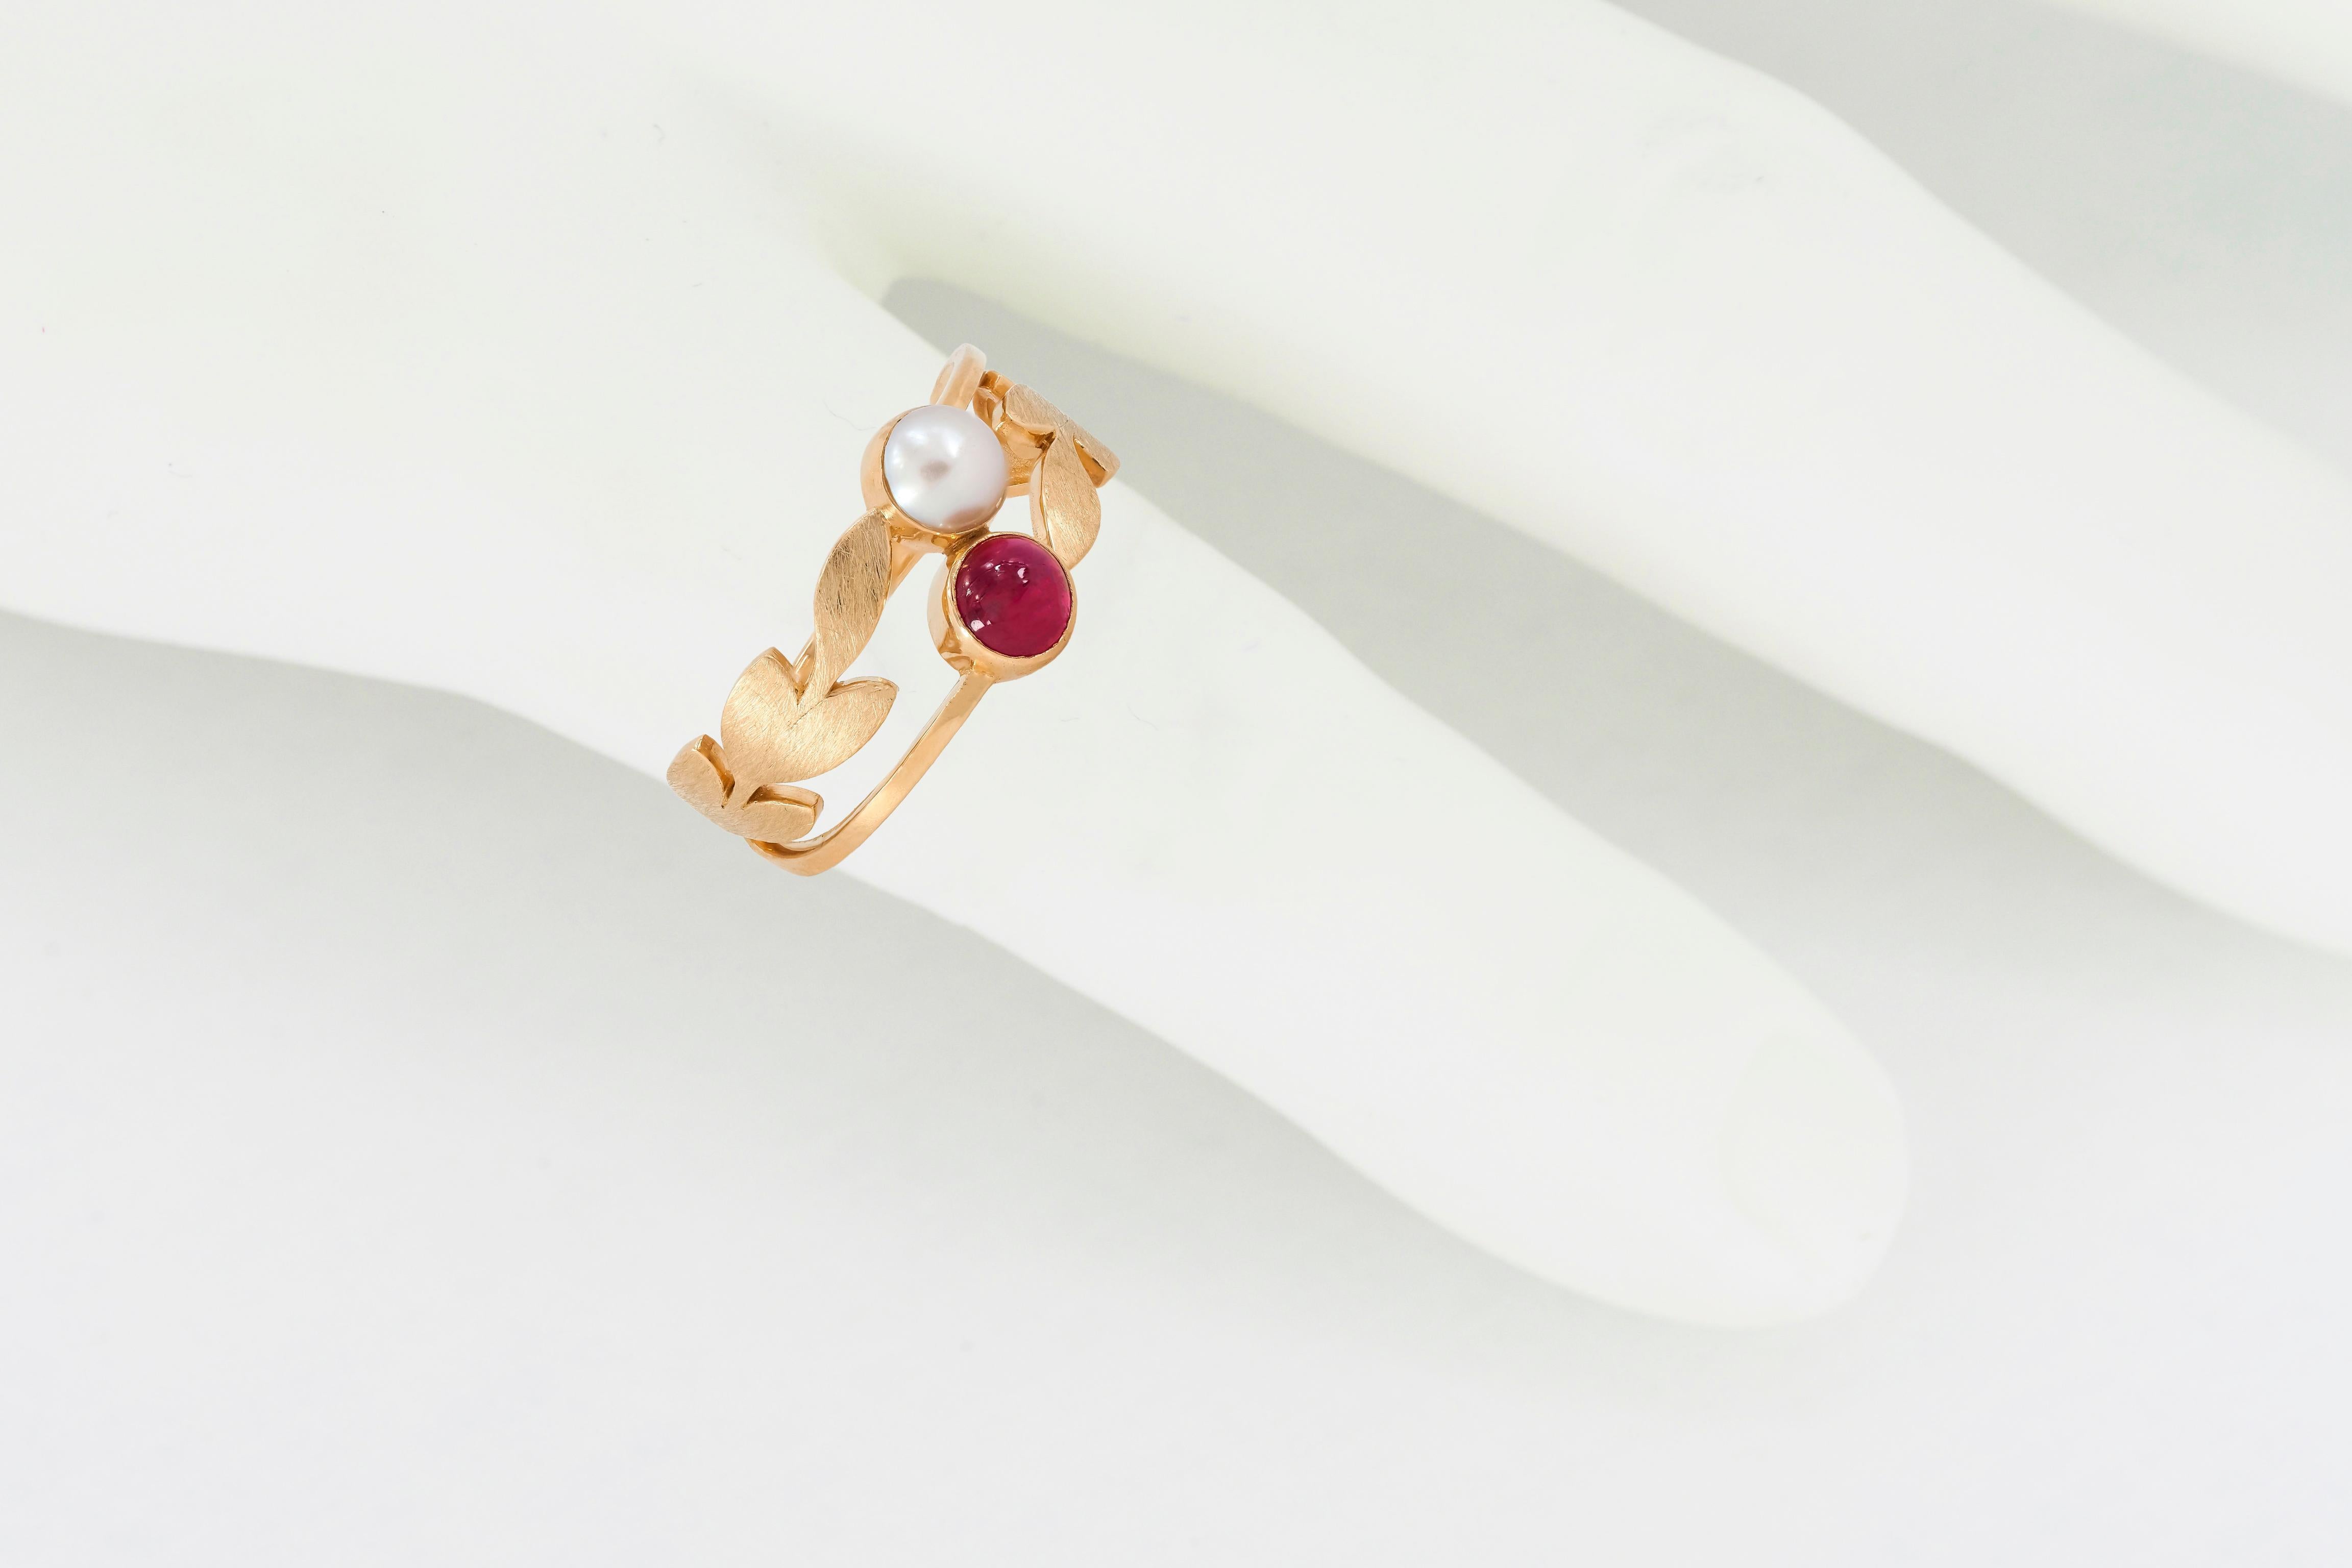 14k Gold Ring with Ruby and Pearl 1